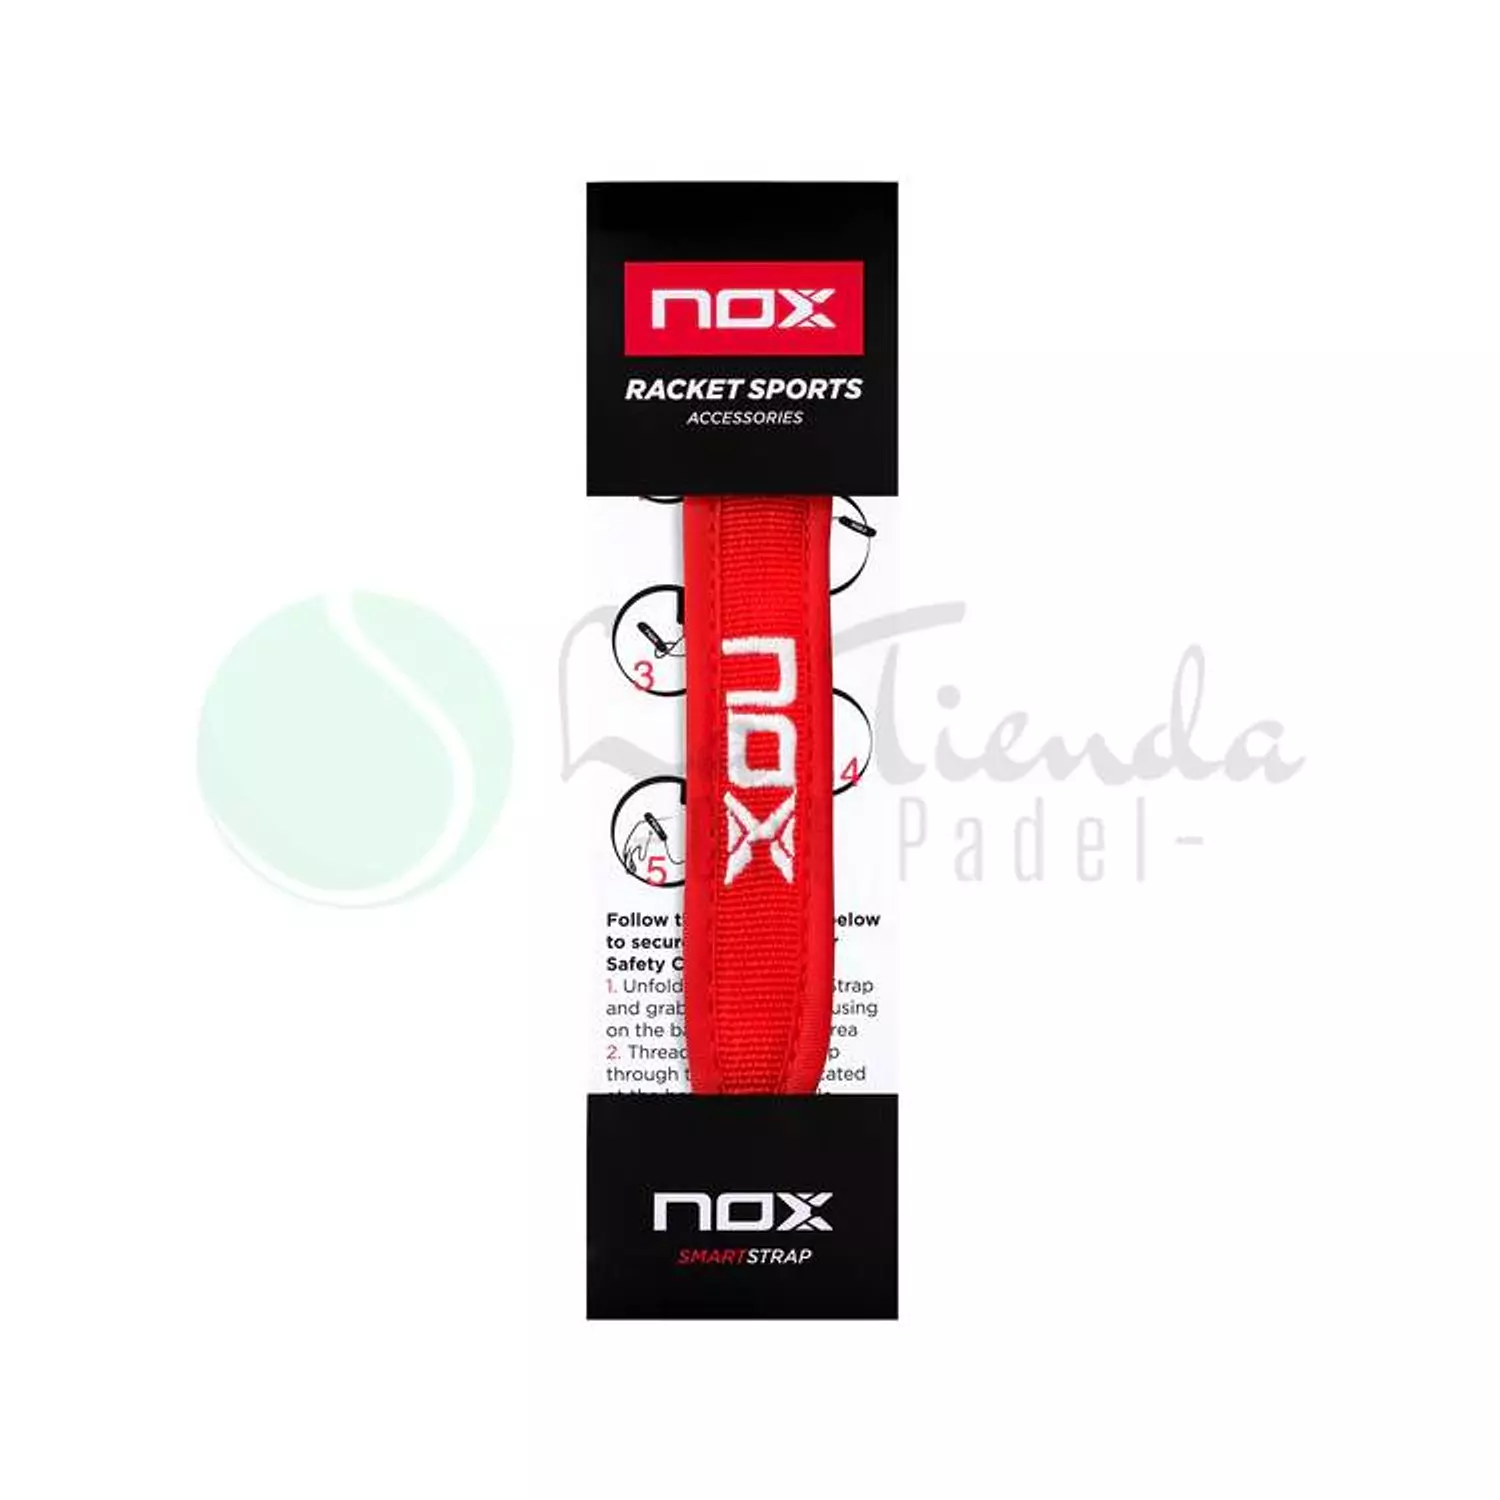 Nox SmartStrap safety cord LUXURY - Multi colors hover image